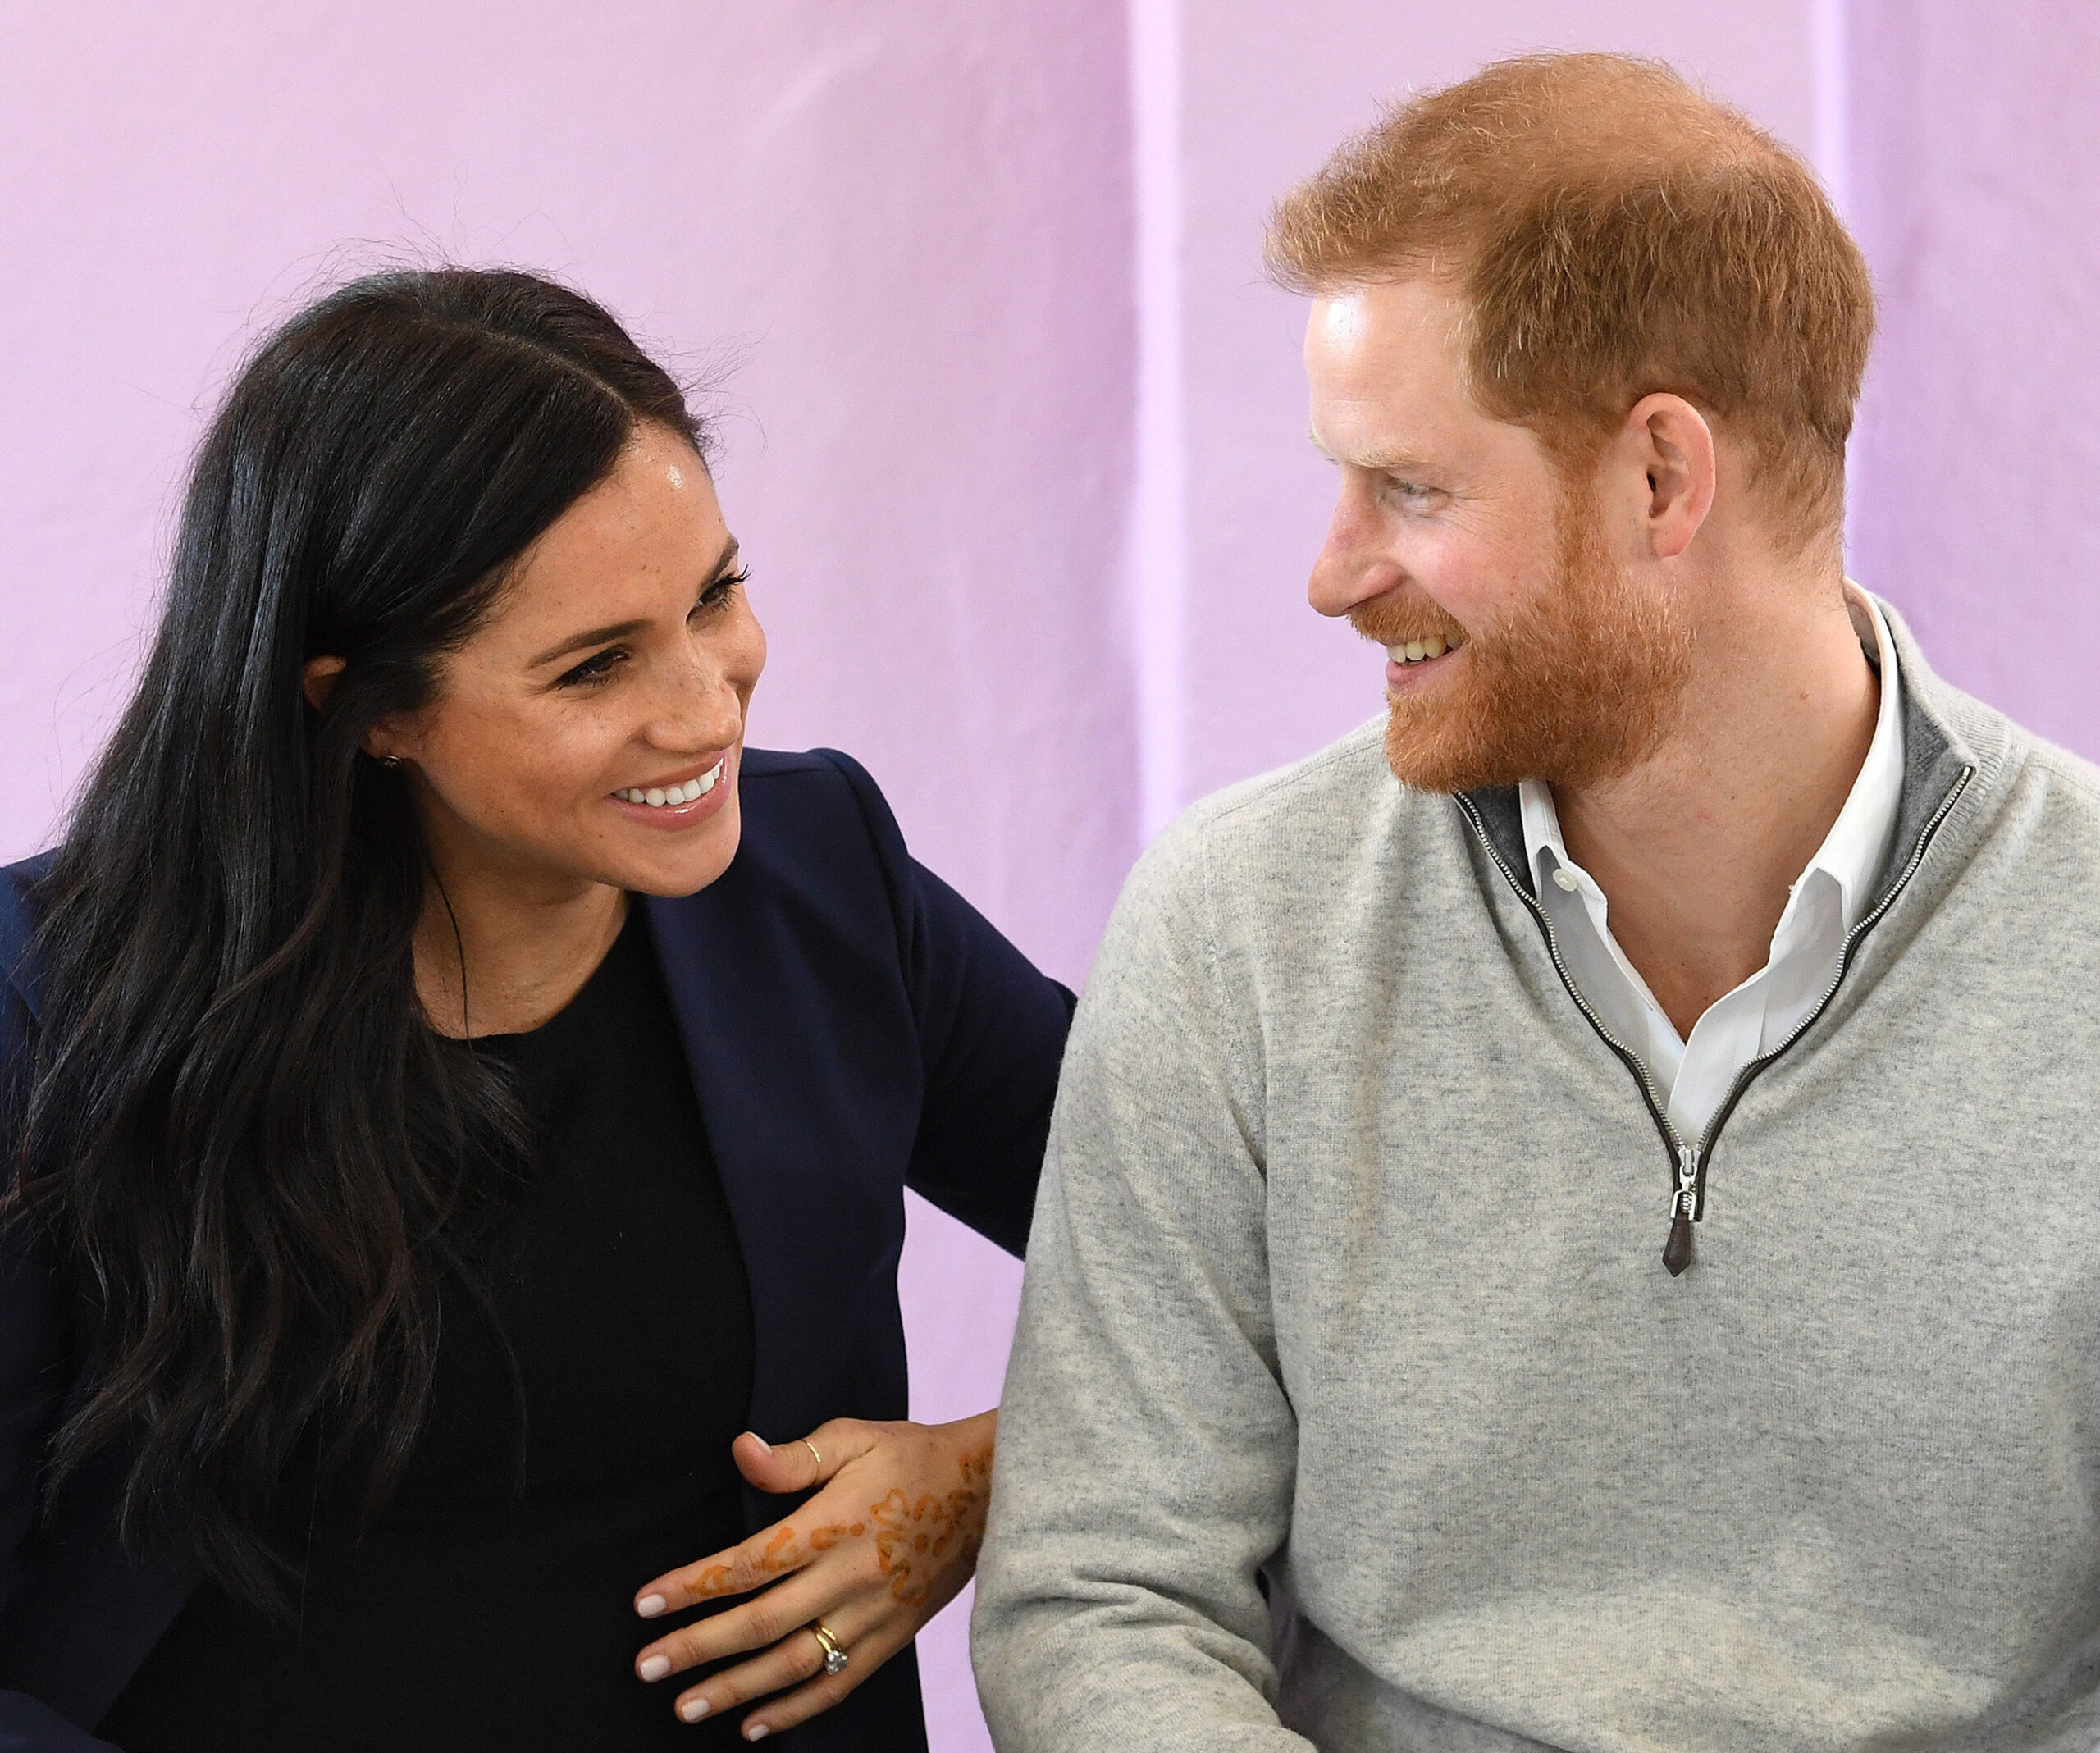 Making it official! Prince Harry and Duchess Meghan create new Sussex household